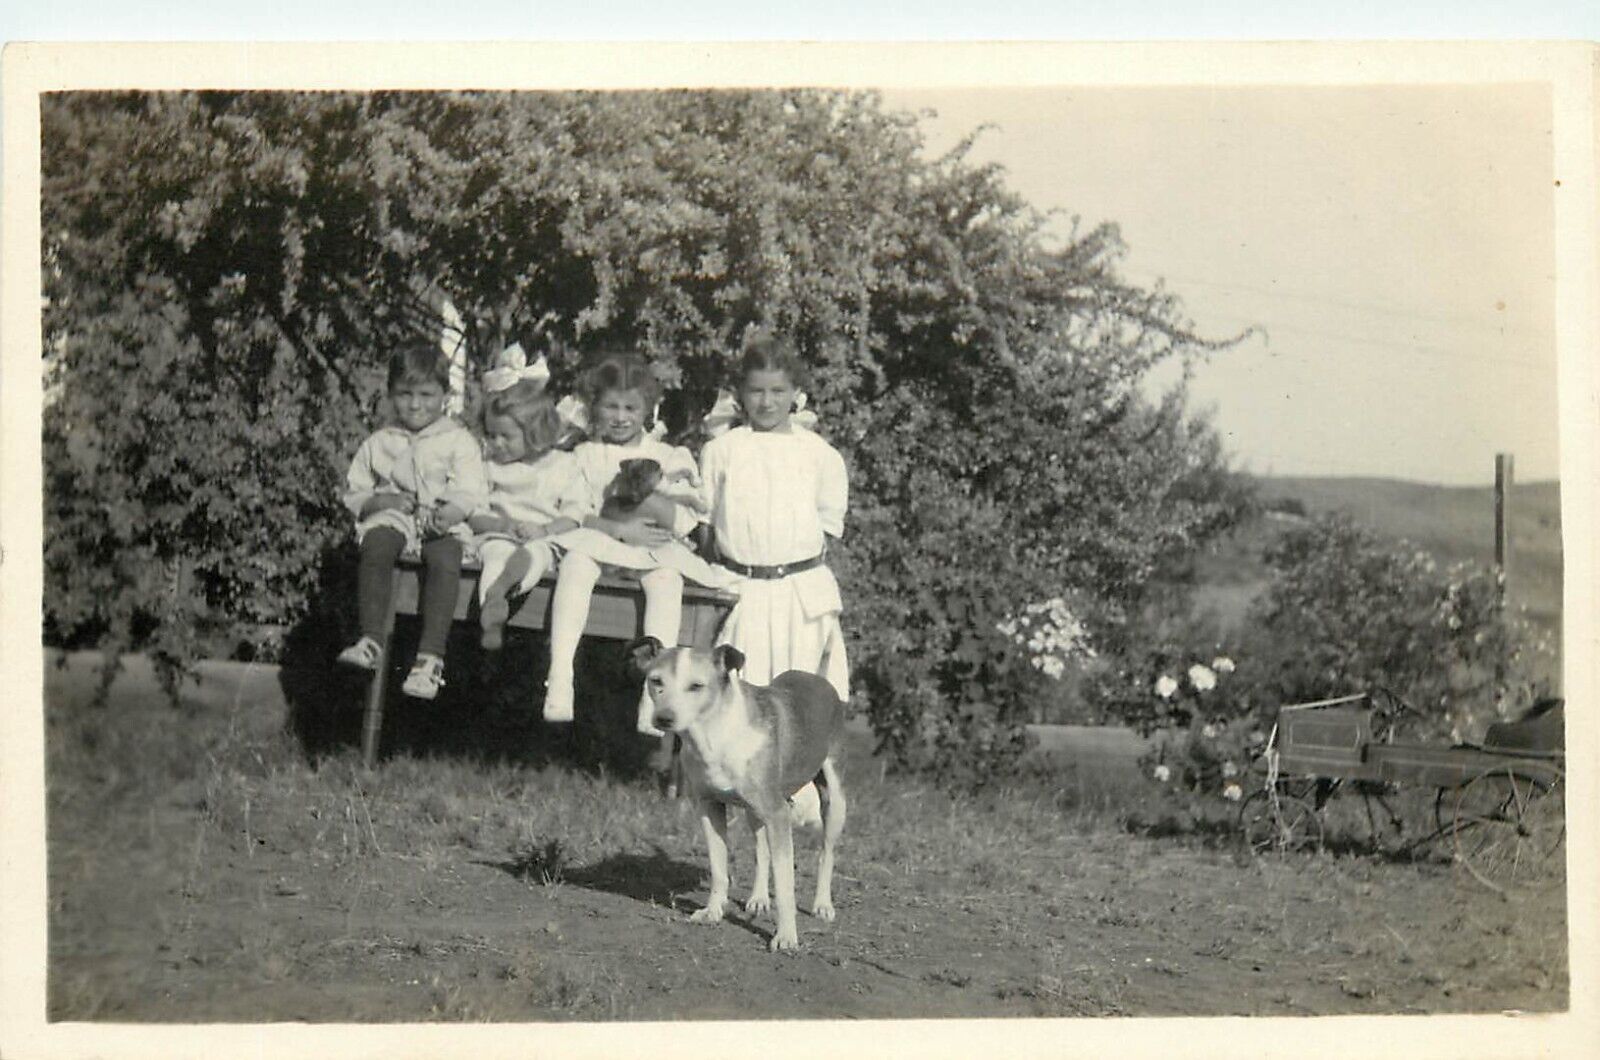 c1915 RPPC; 4 Children in White and Sweet Dog in Spring Landscape, San Diego CA